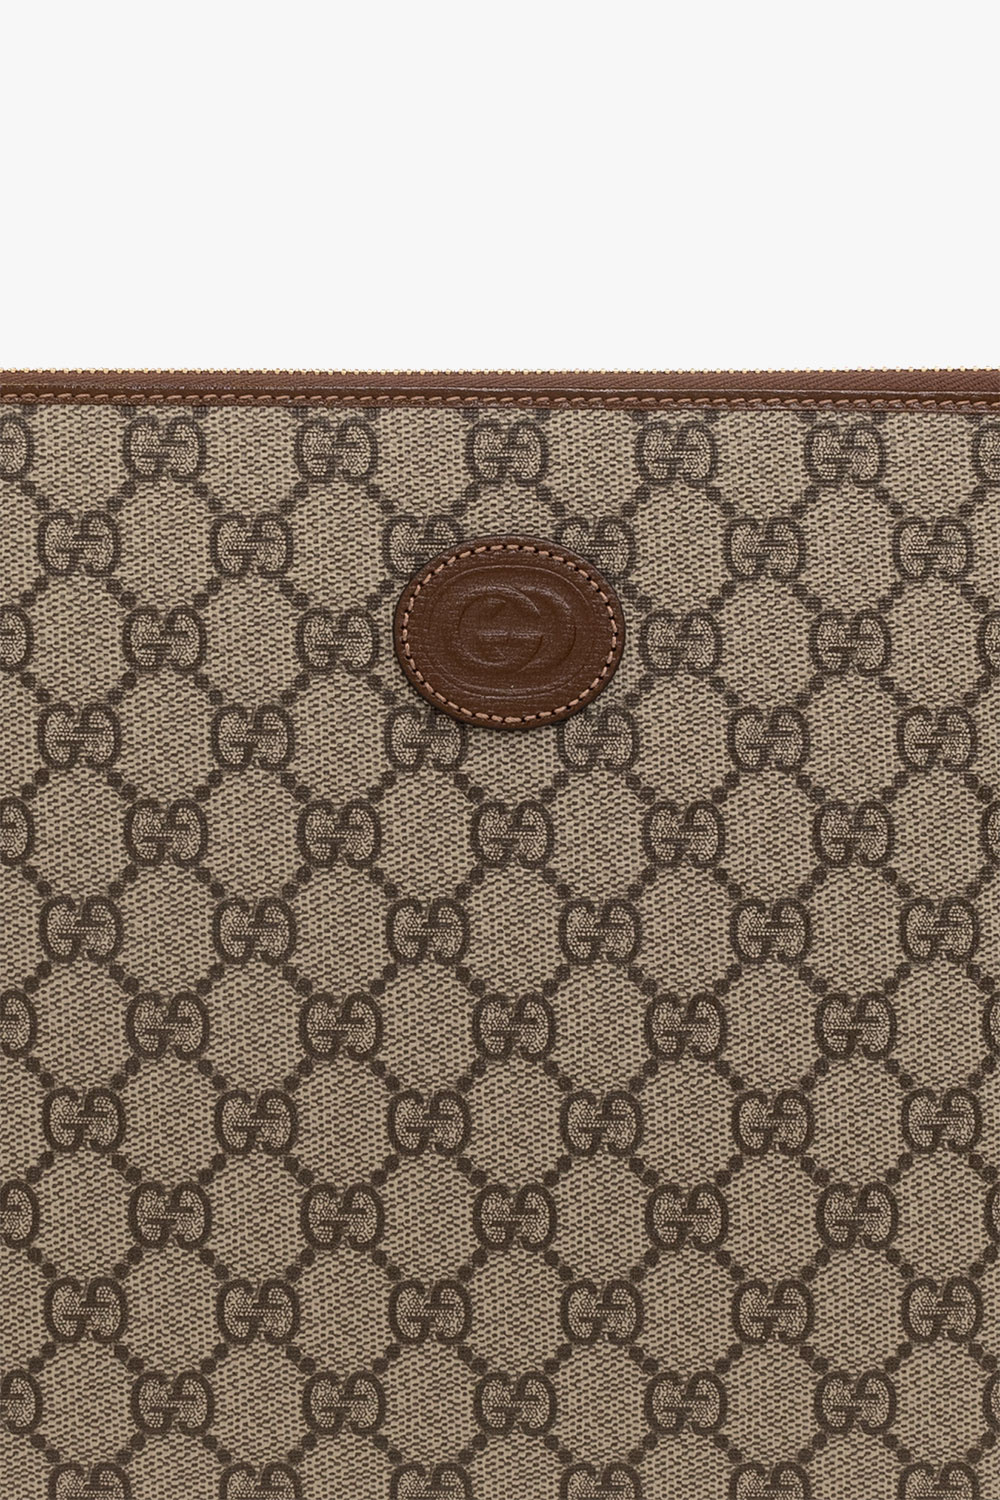 Gucci how to authenticate a Gucci bag